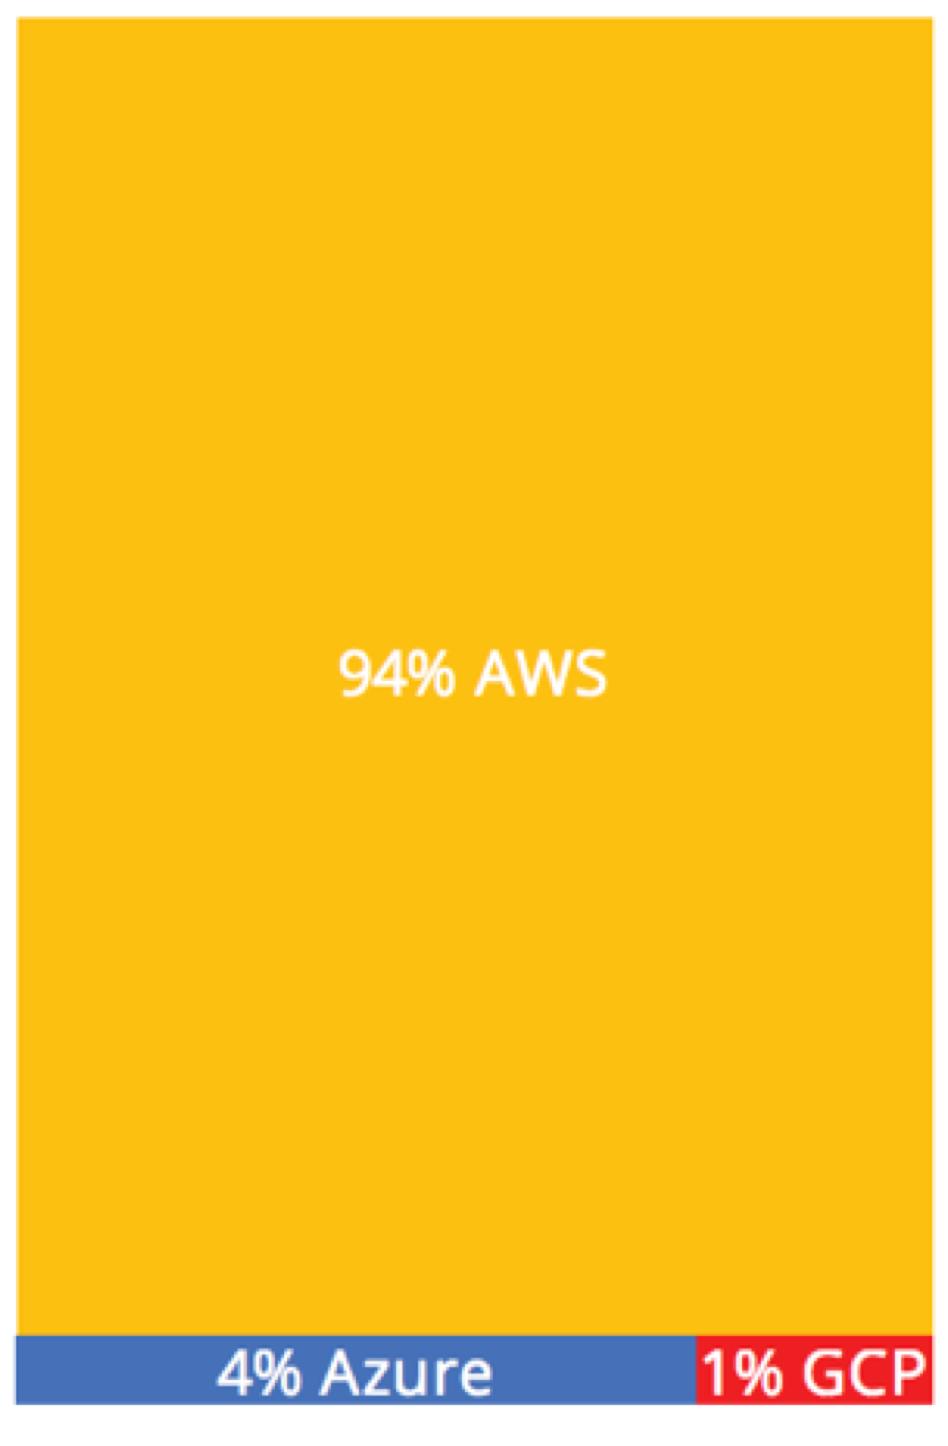 AWS dominates in terms of user access count